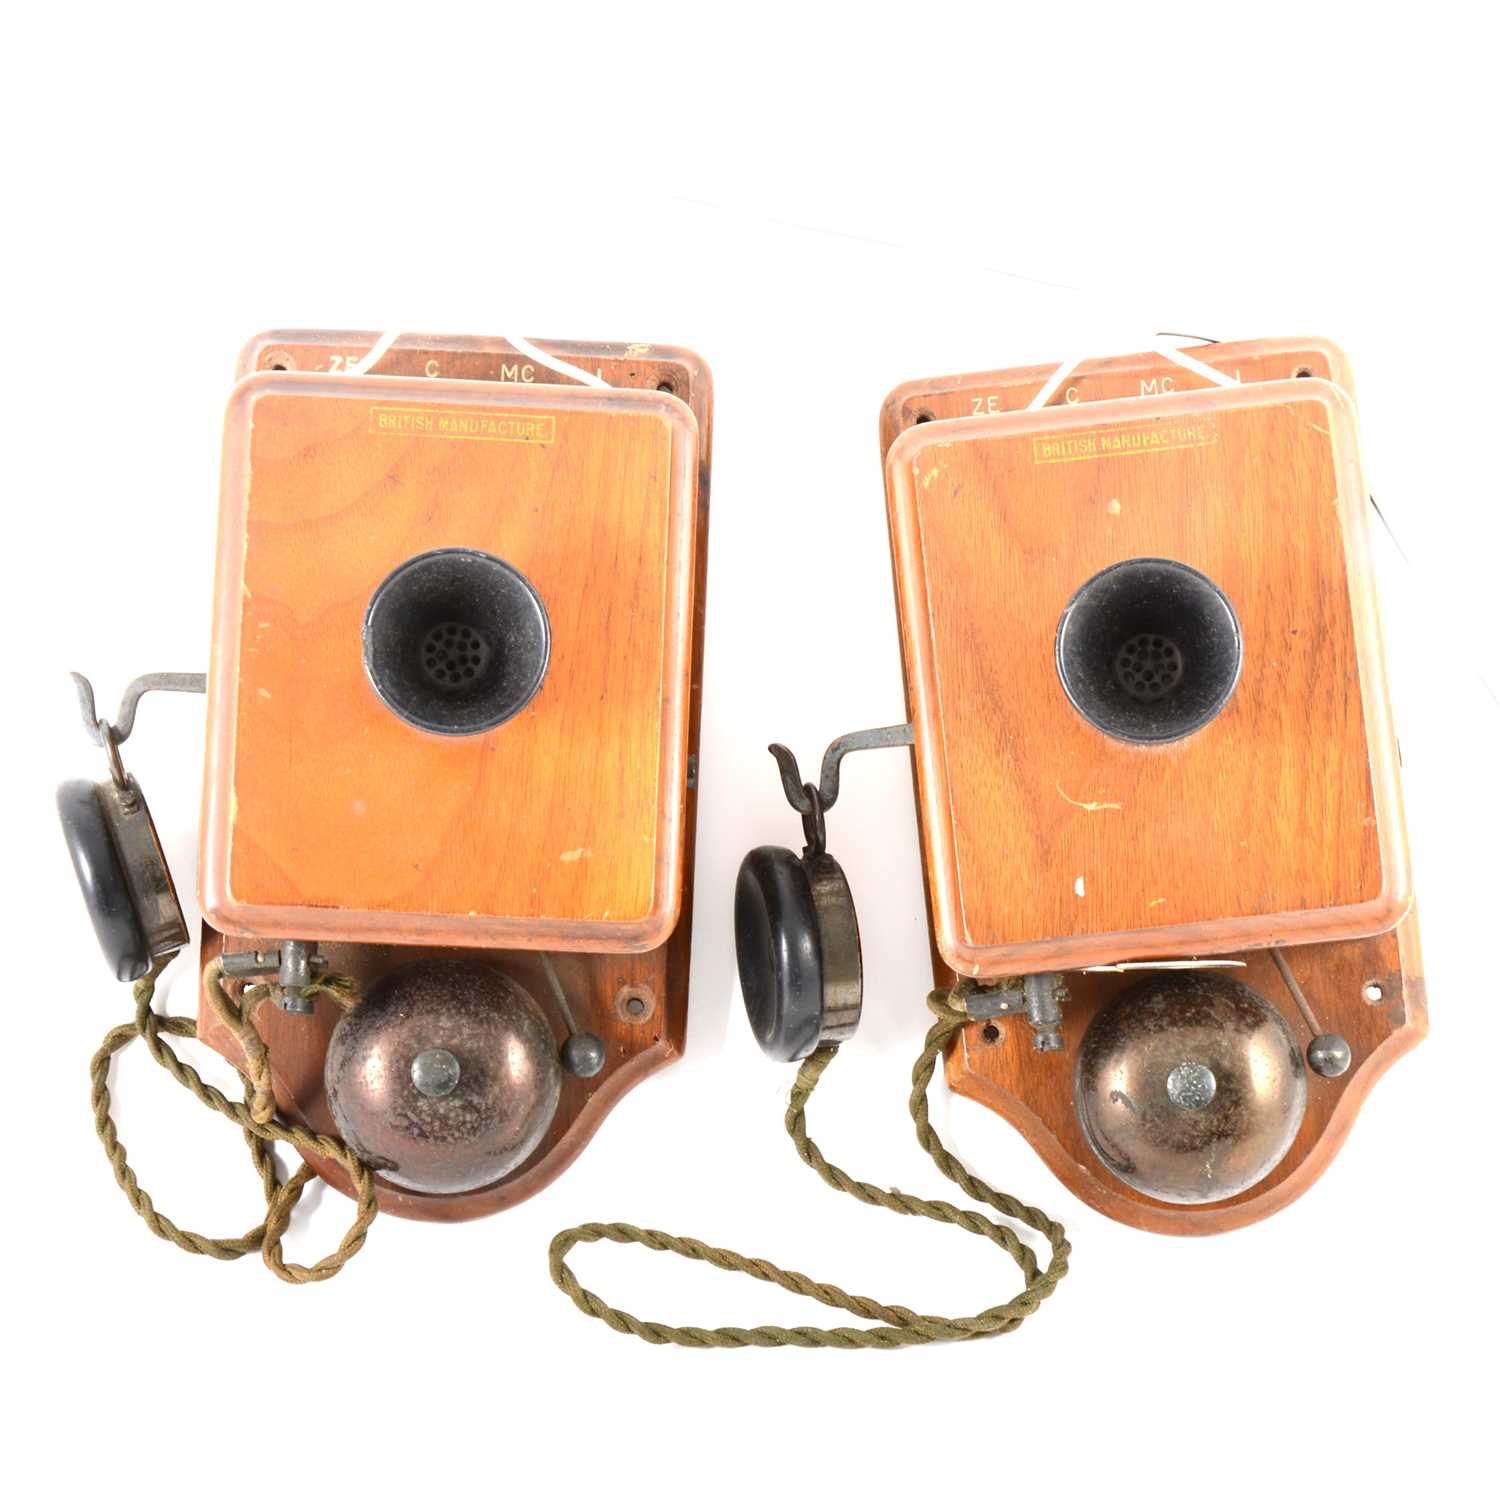 Lot 119 - Two vintage wall-mounted telephones